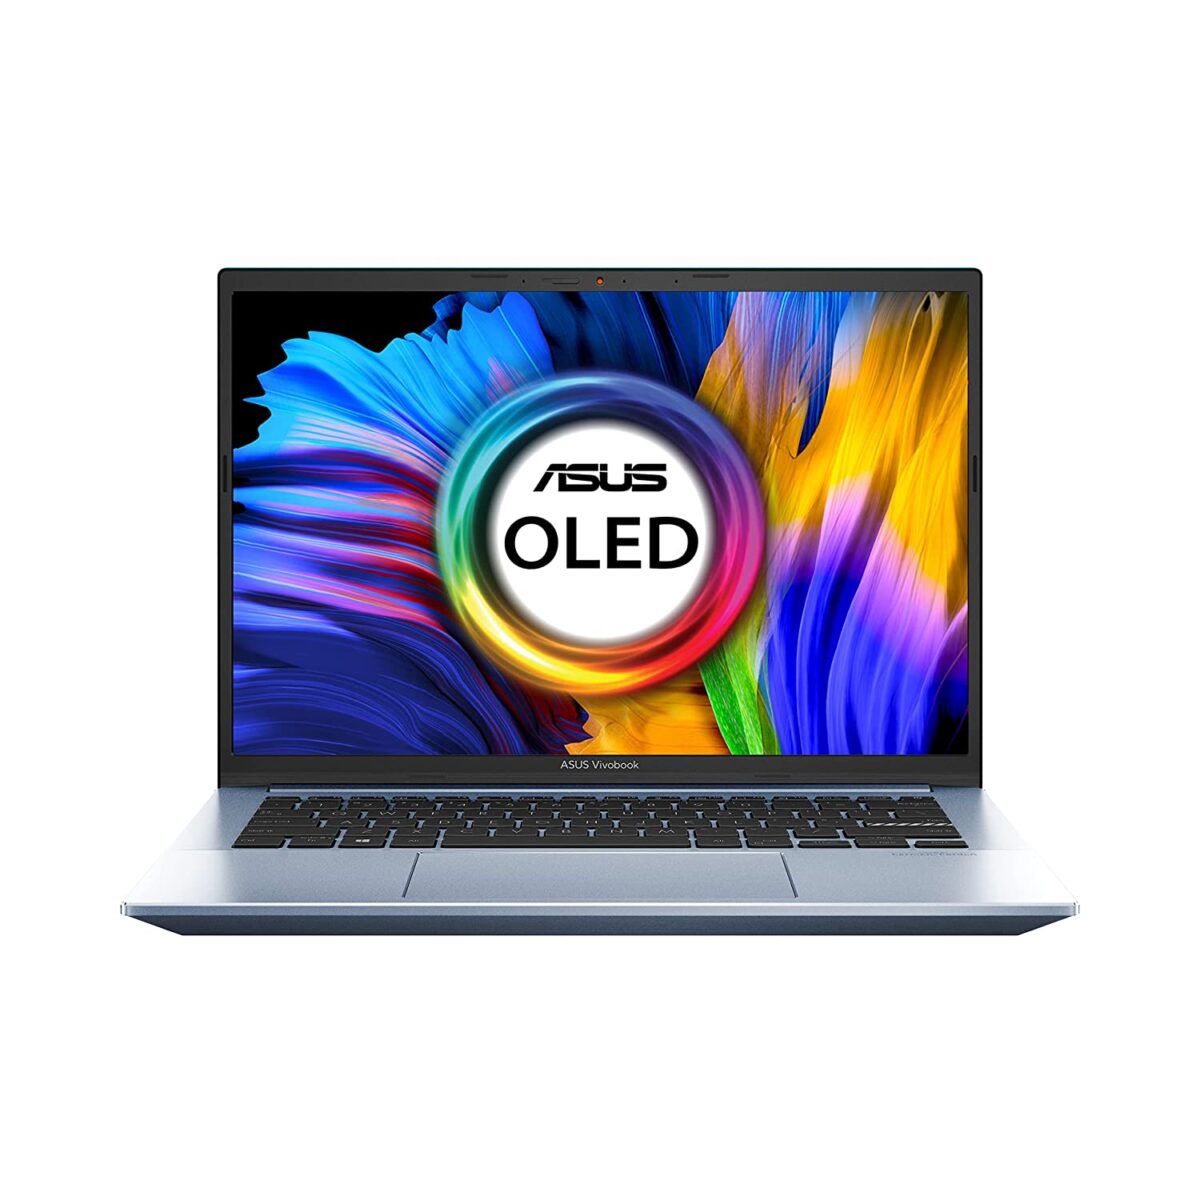 ASUS Vivobook Pro 14 OLED M3400QA-KM512WS ( AMD Ryzen 5 5600H / 16GB ram / 512GB SSD ) launched in India